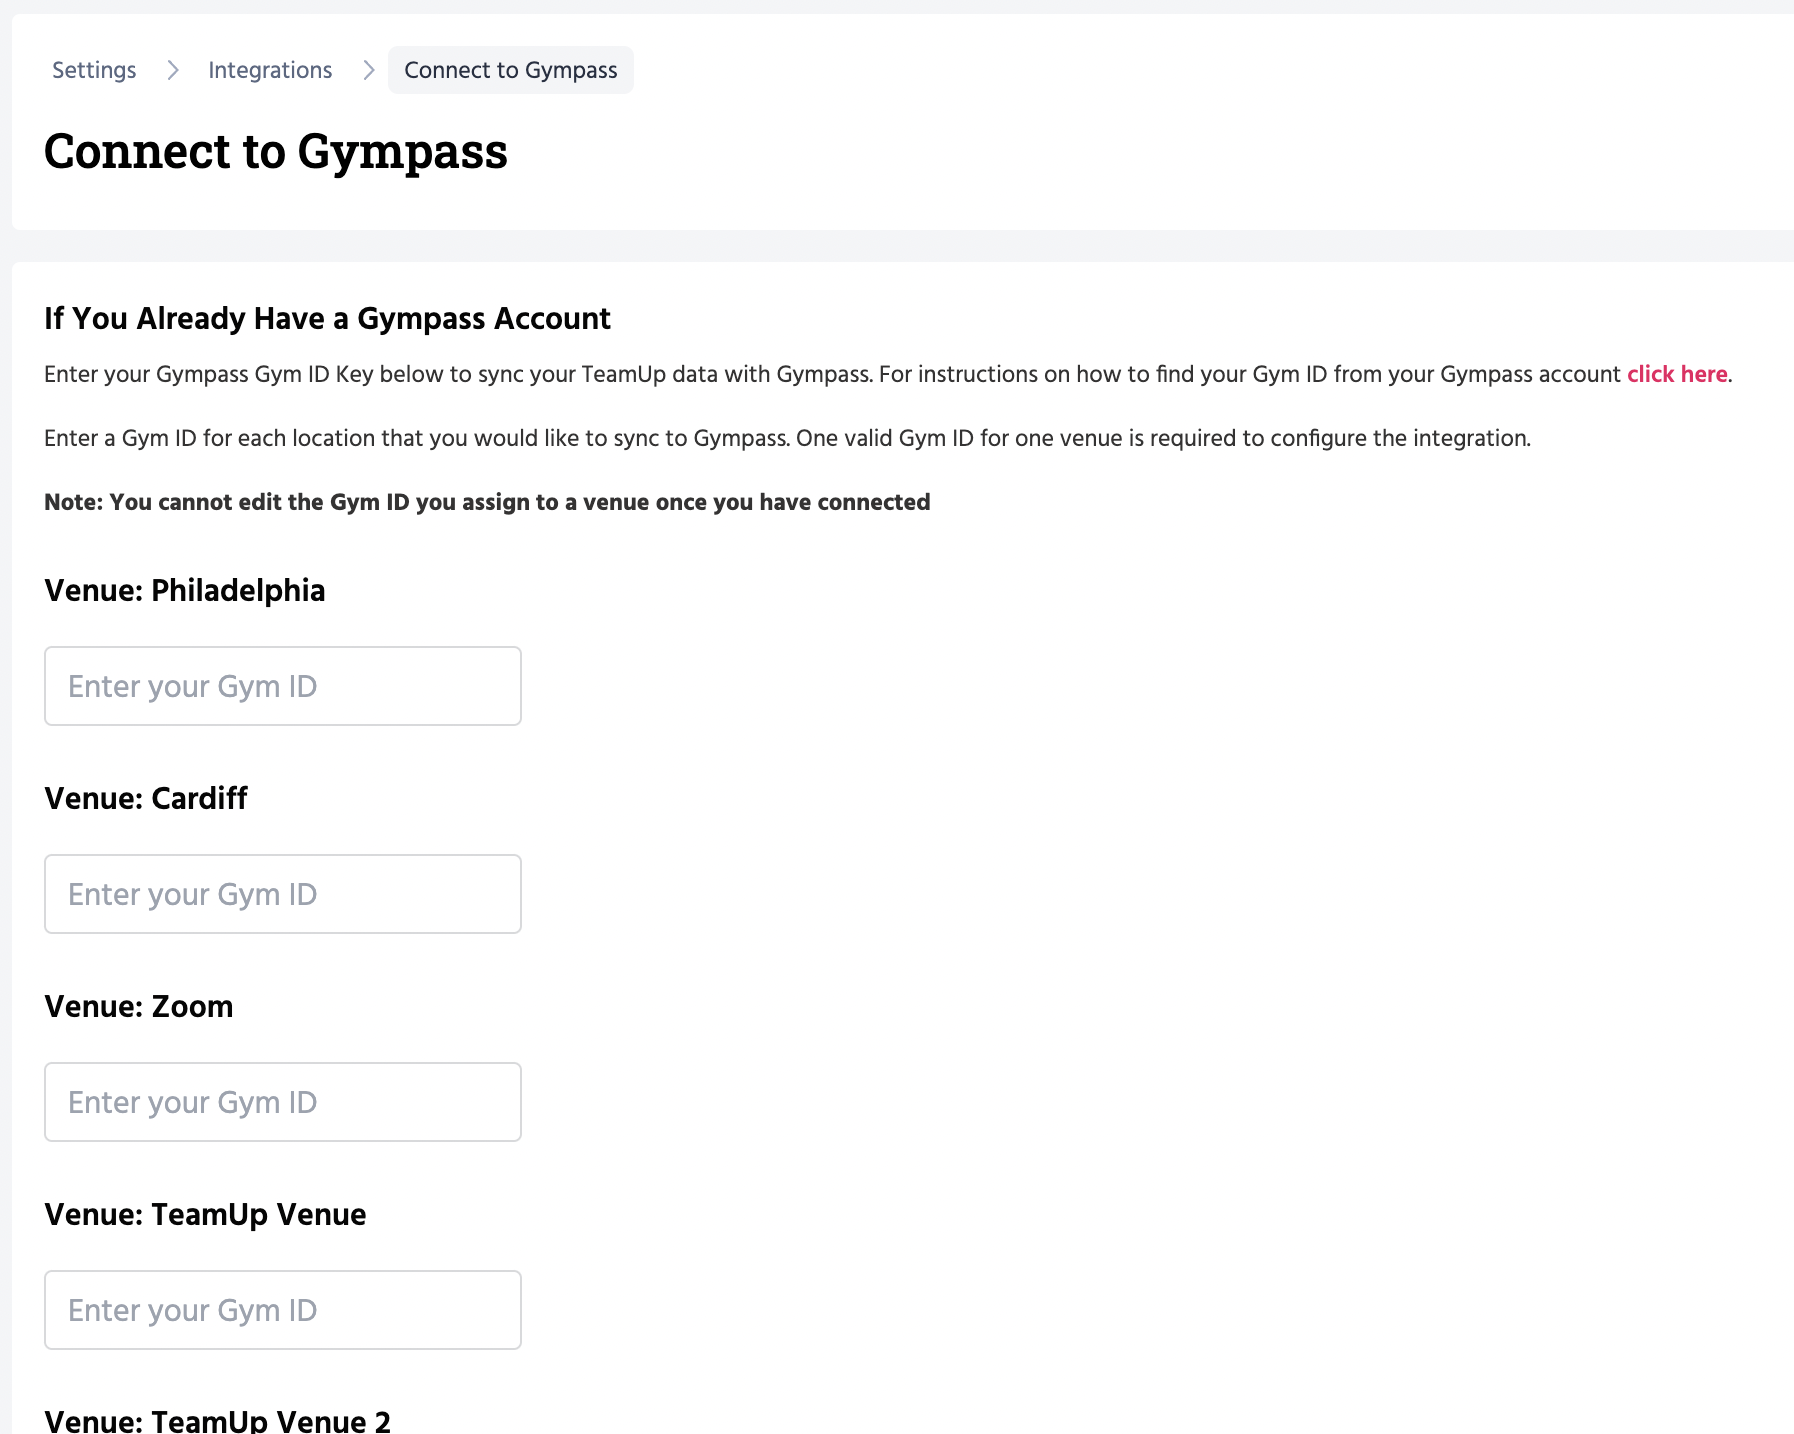 TeamUp-Gympass integration page. This page shows a list of your TeamUp venues and a field to enter a Gympass Gym ID under each one.